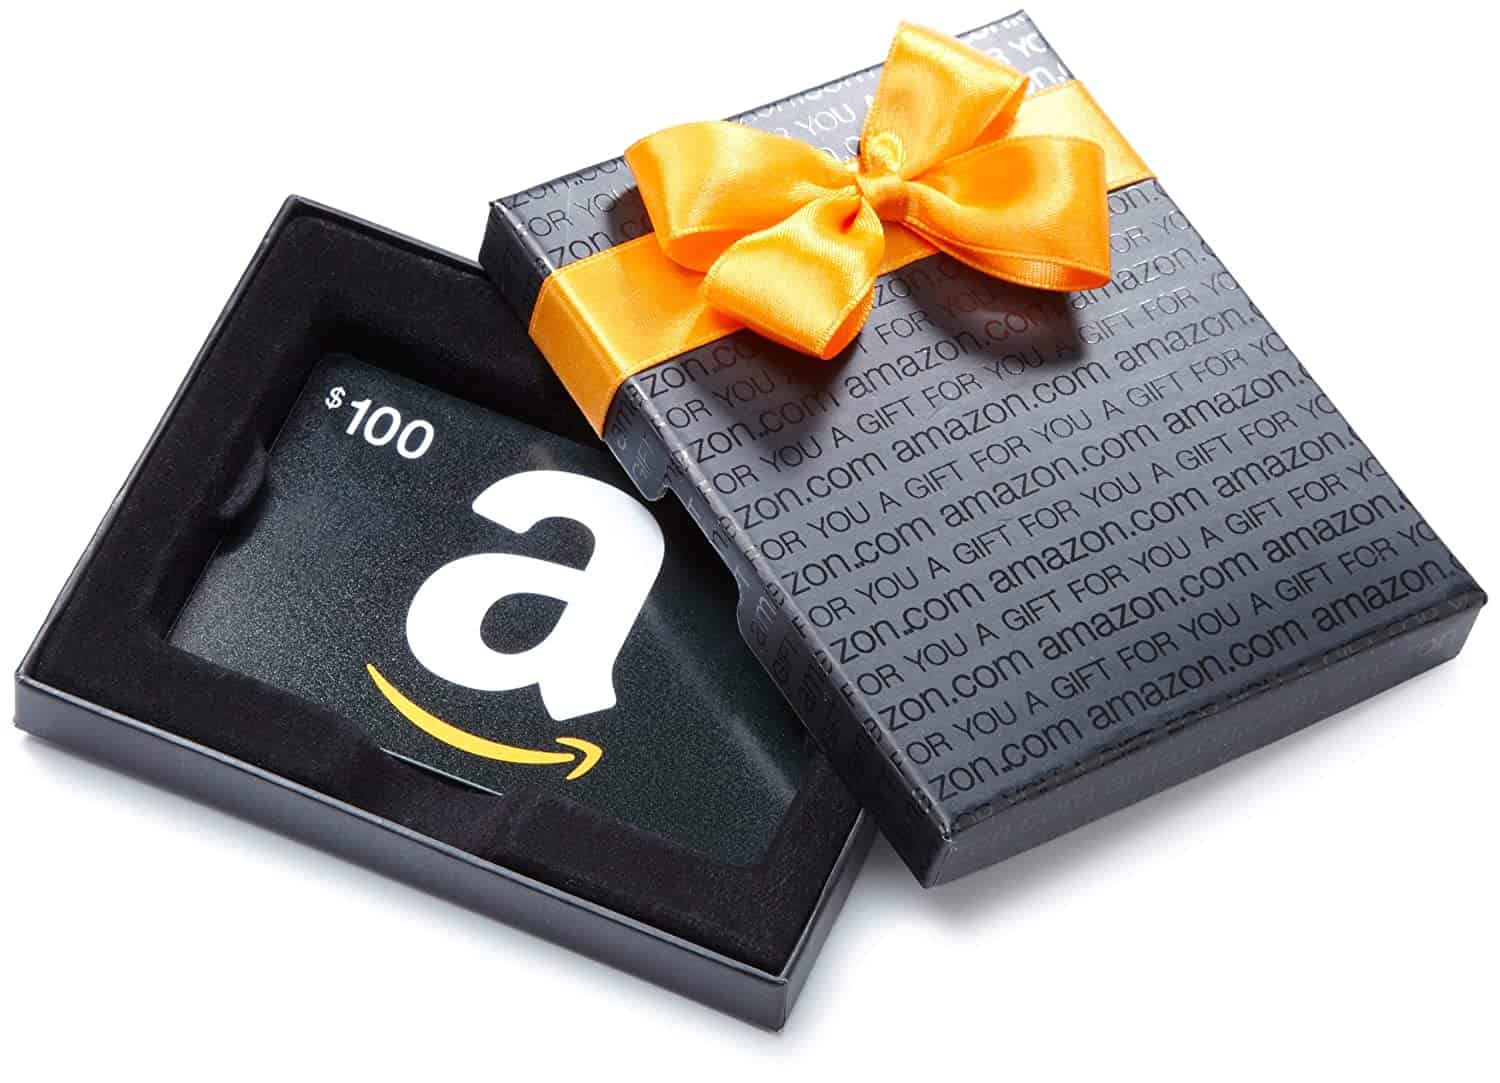 100 Amazon Giftcard Giveaway Steamy Kitchen Recipes Giveaways